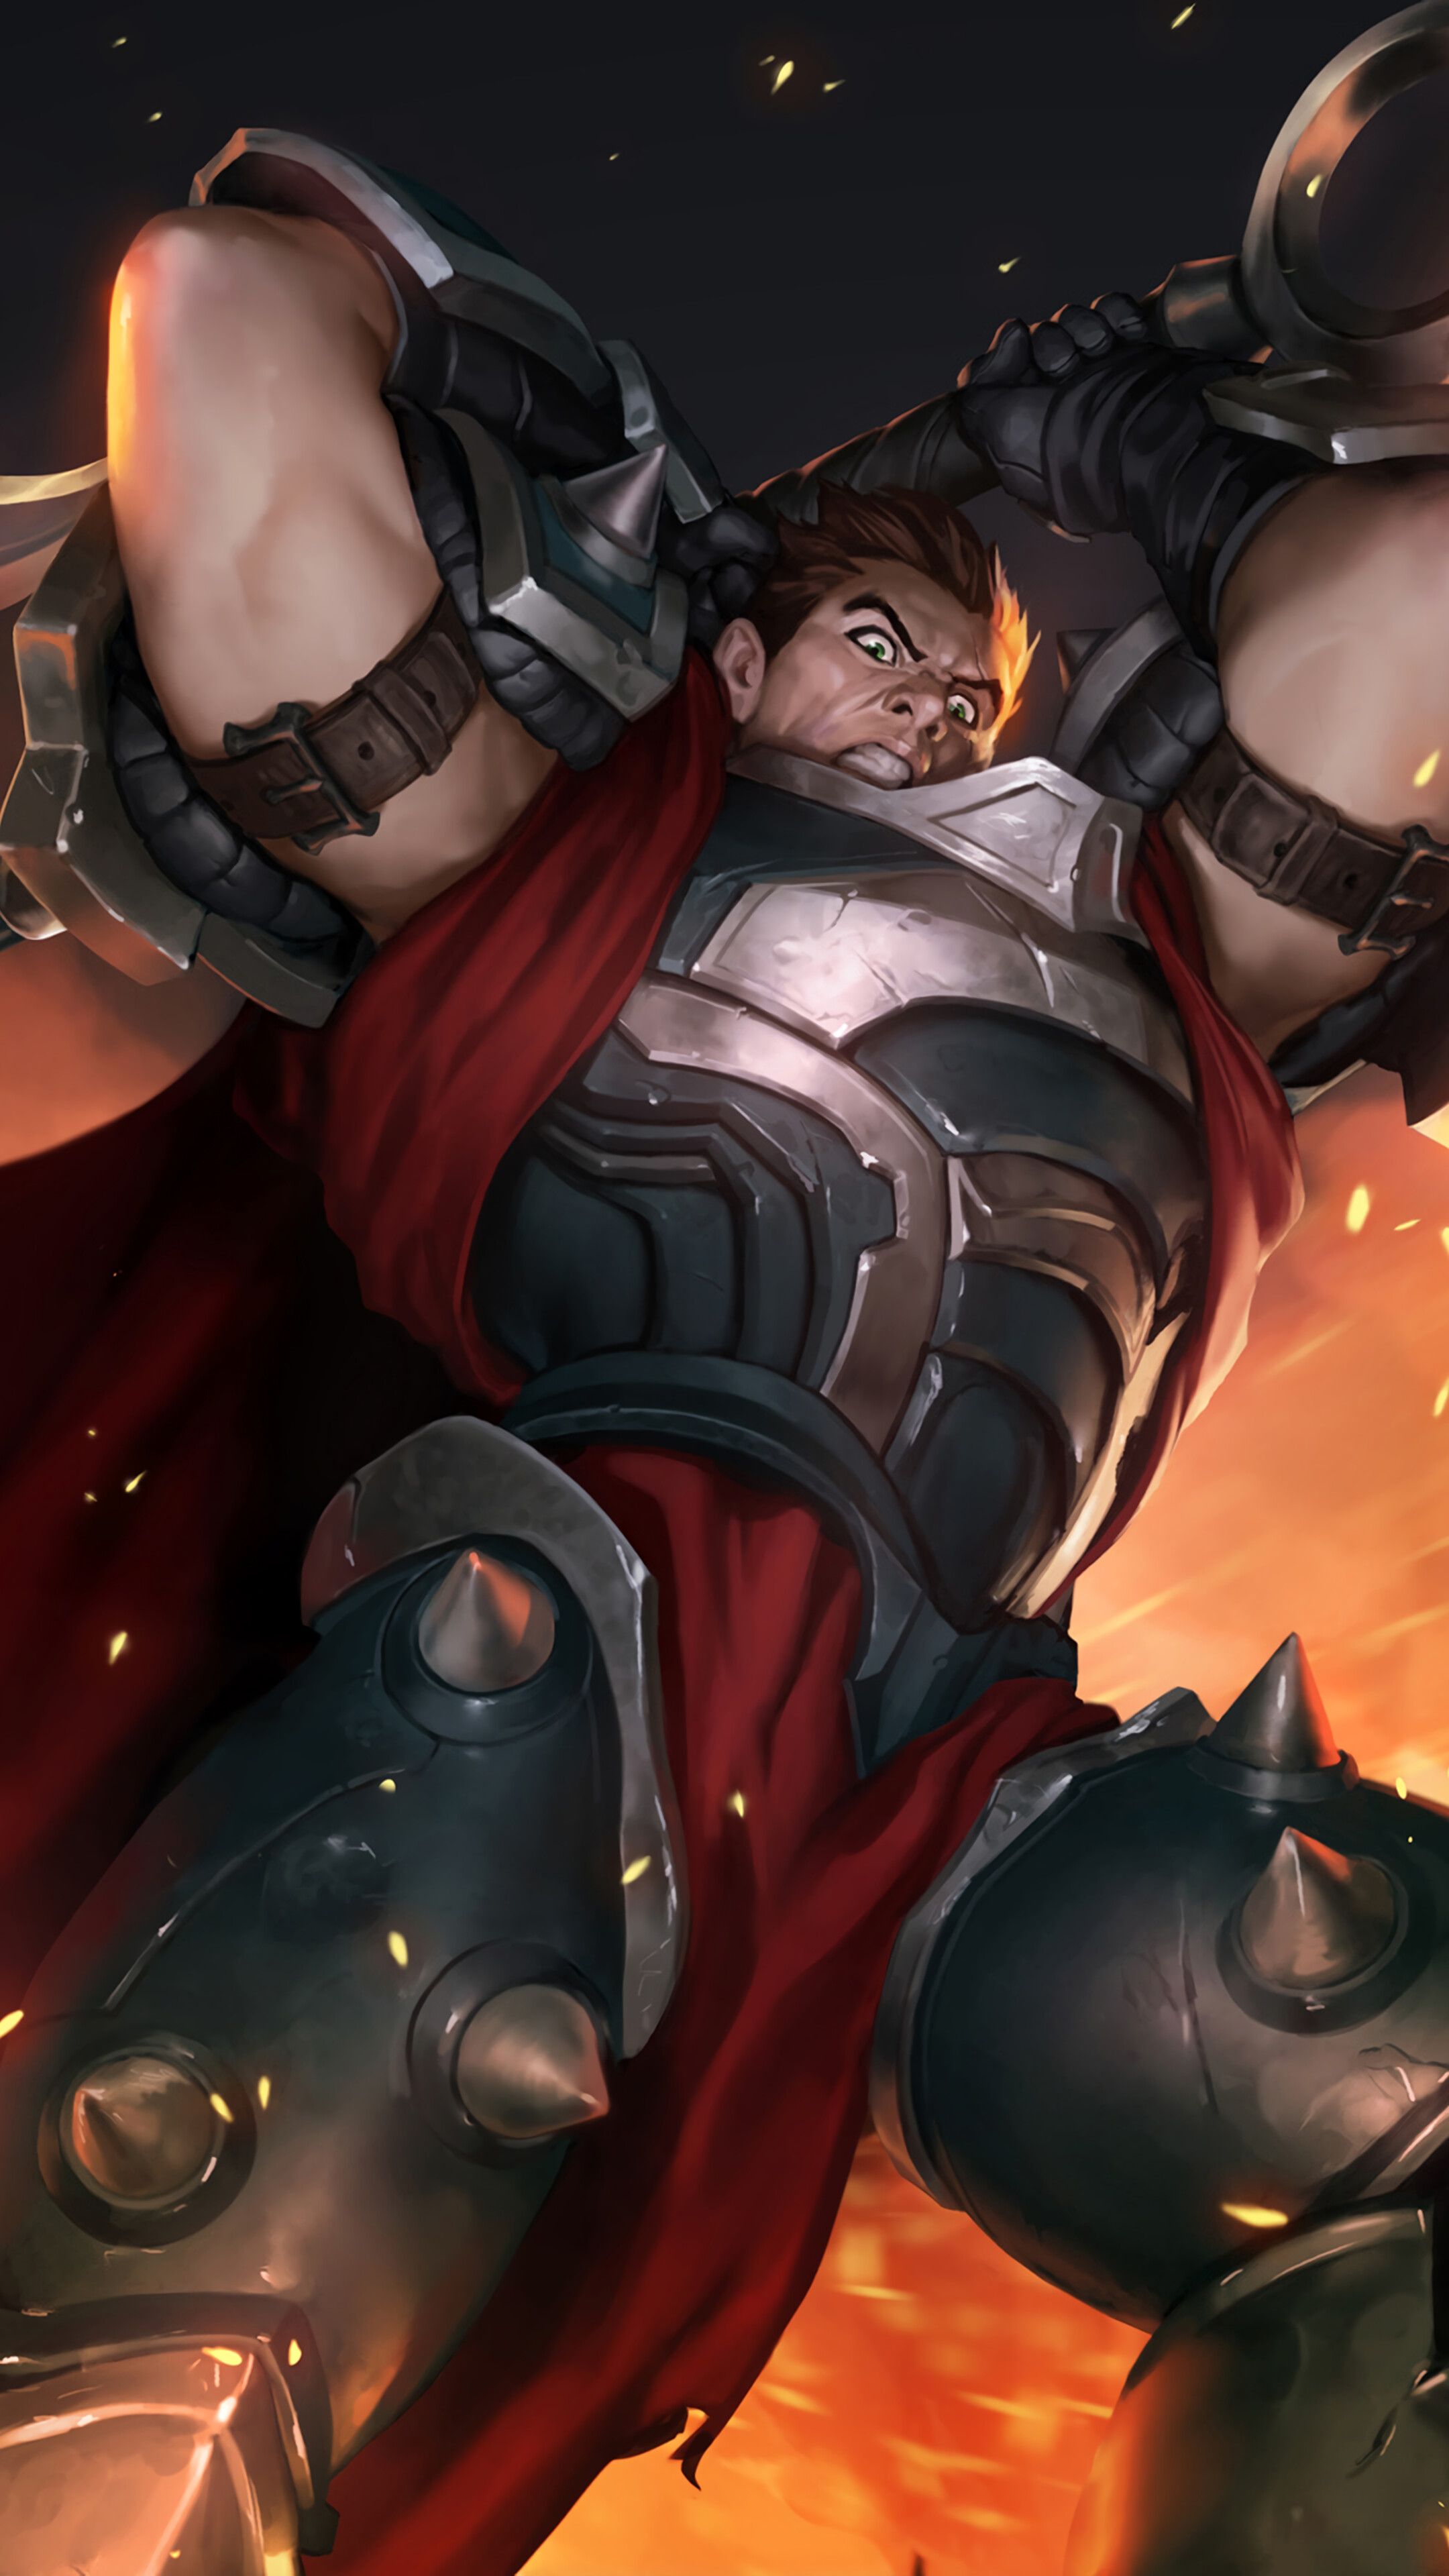 327043 Darius, LoL, Legends of Runeterra, 4K phone HD Wallpapers, Image, Backgrounds, Photos and Pictures